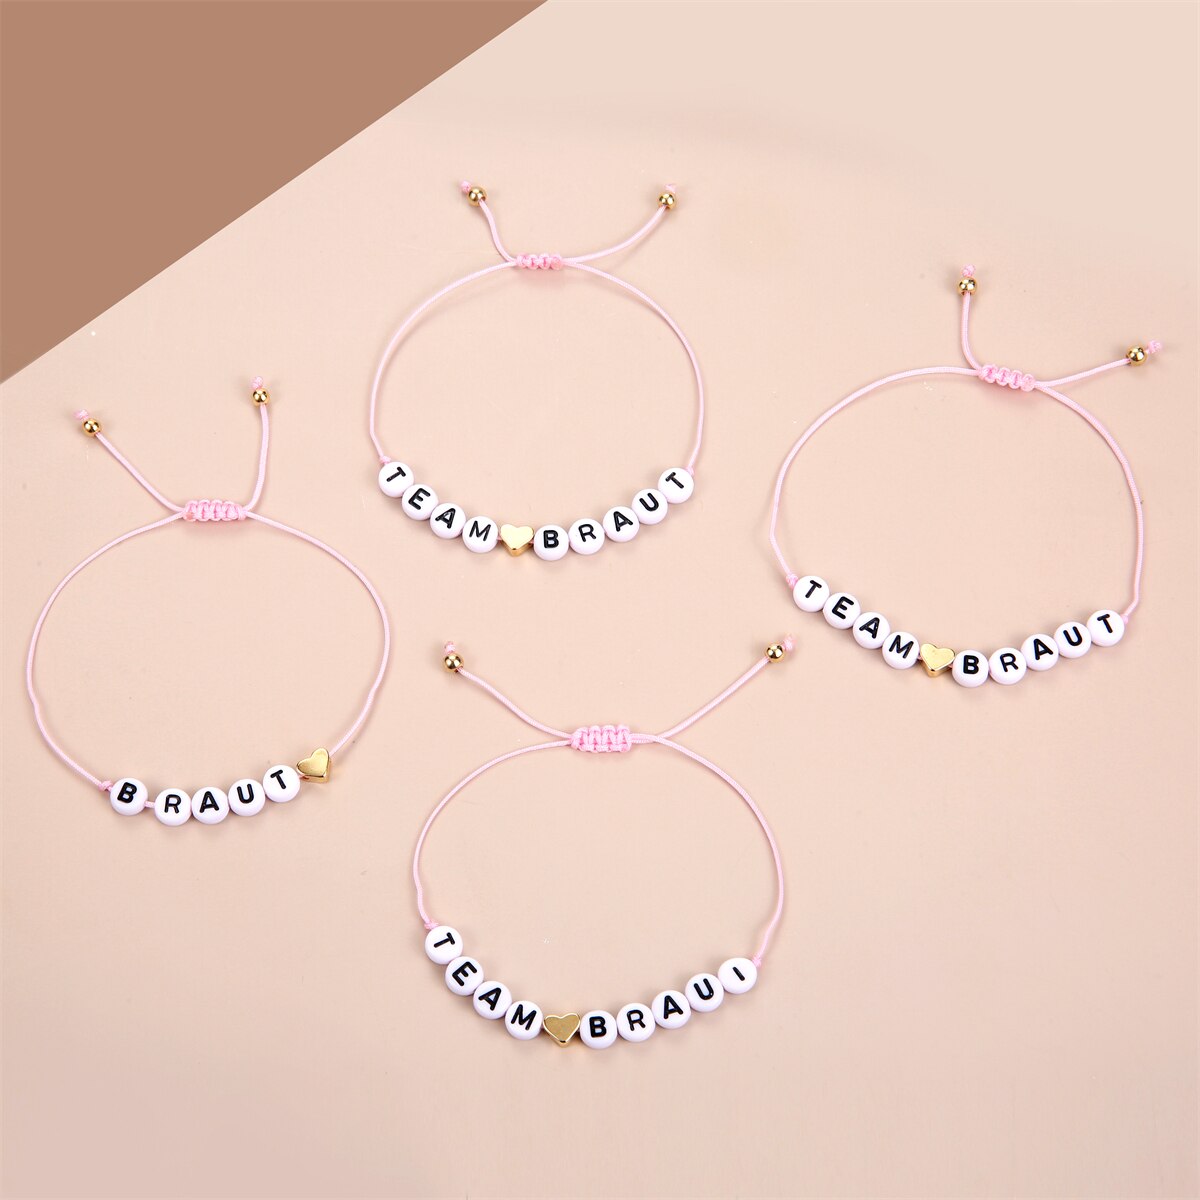 12pcs/set Acrylic Letter Charms Bracelets for Women Handmade Braided Bracelet Bangles Anklets Couples Wedding Party Jewelry